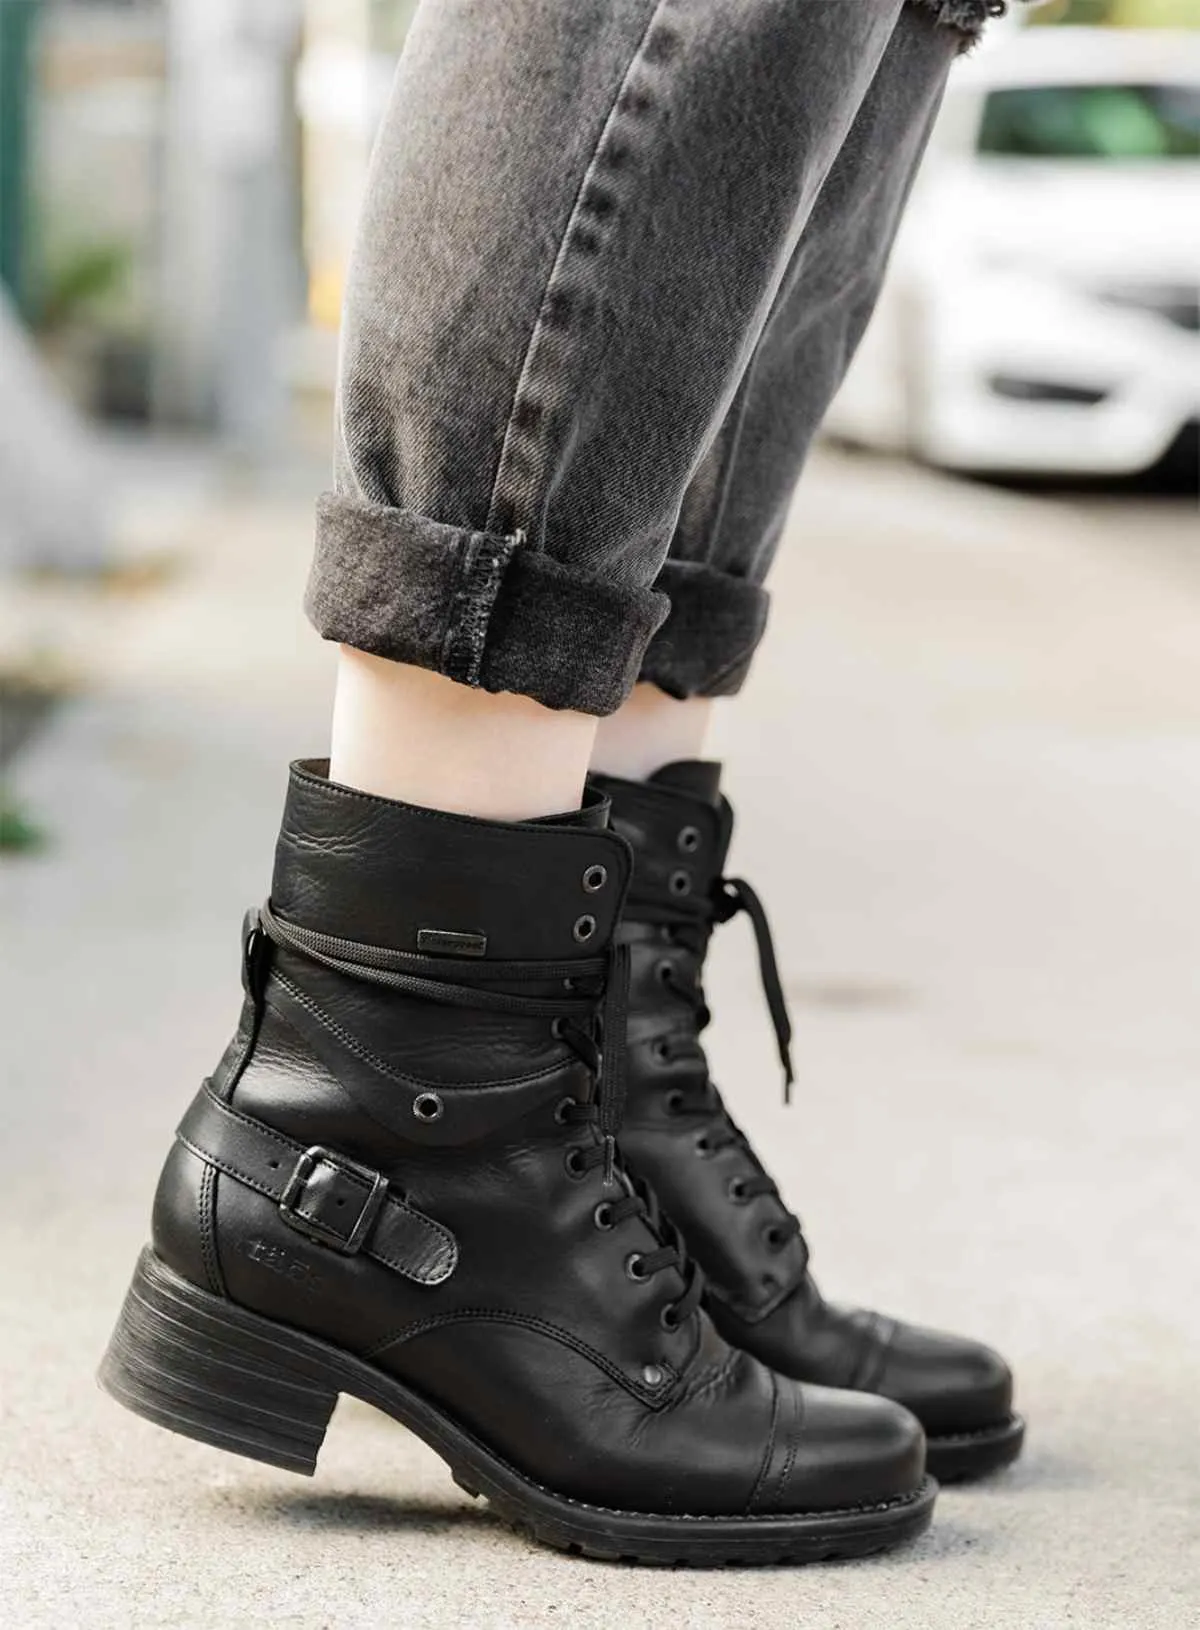 Cropped view of woman's feet wearing Taos crave combat boots in black waterproof with cuffed grey jeans on a sidewalk.